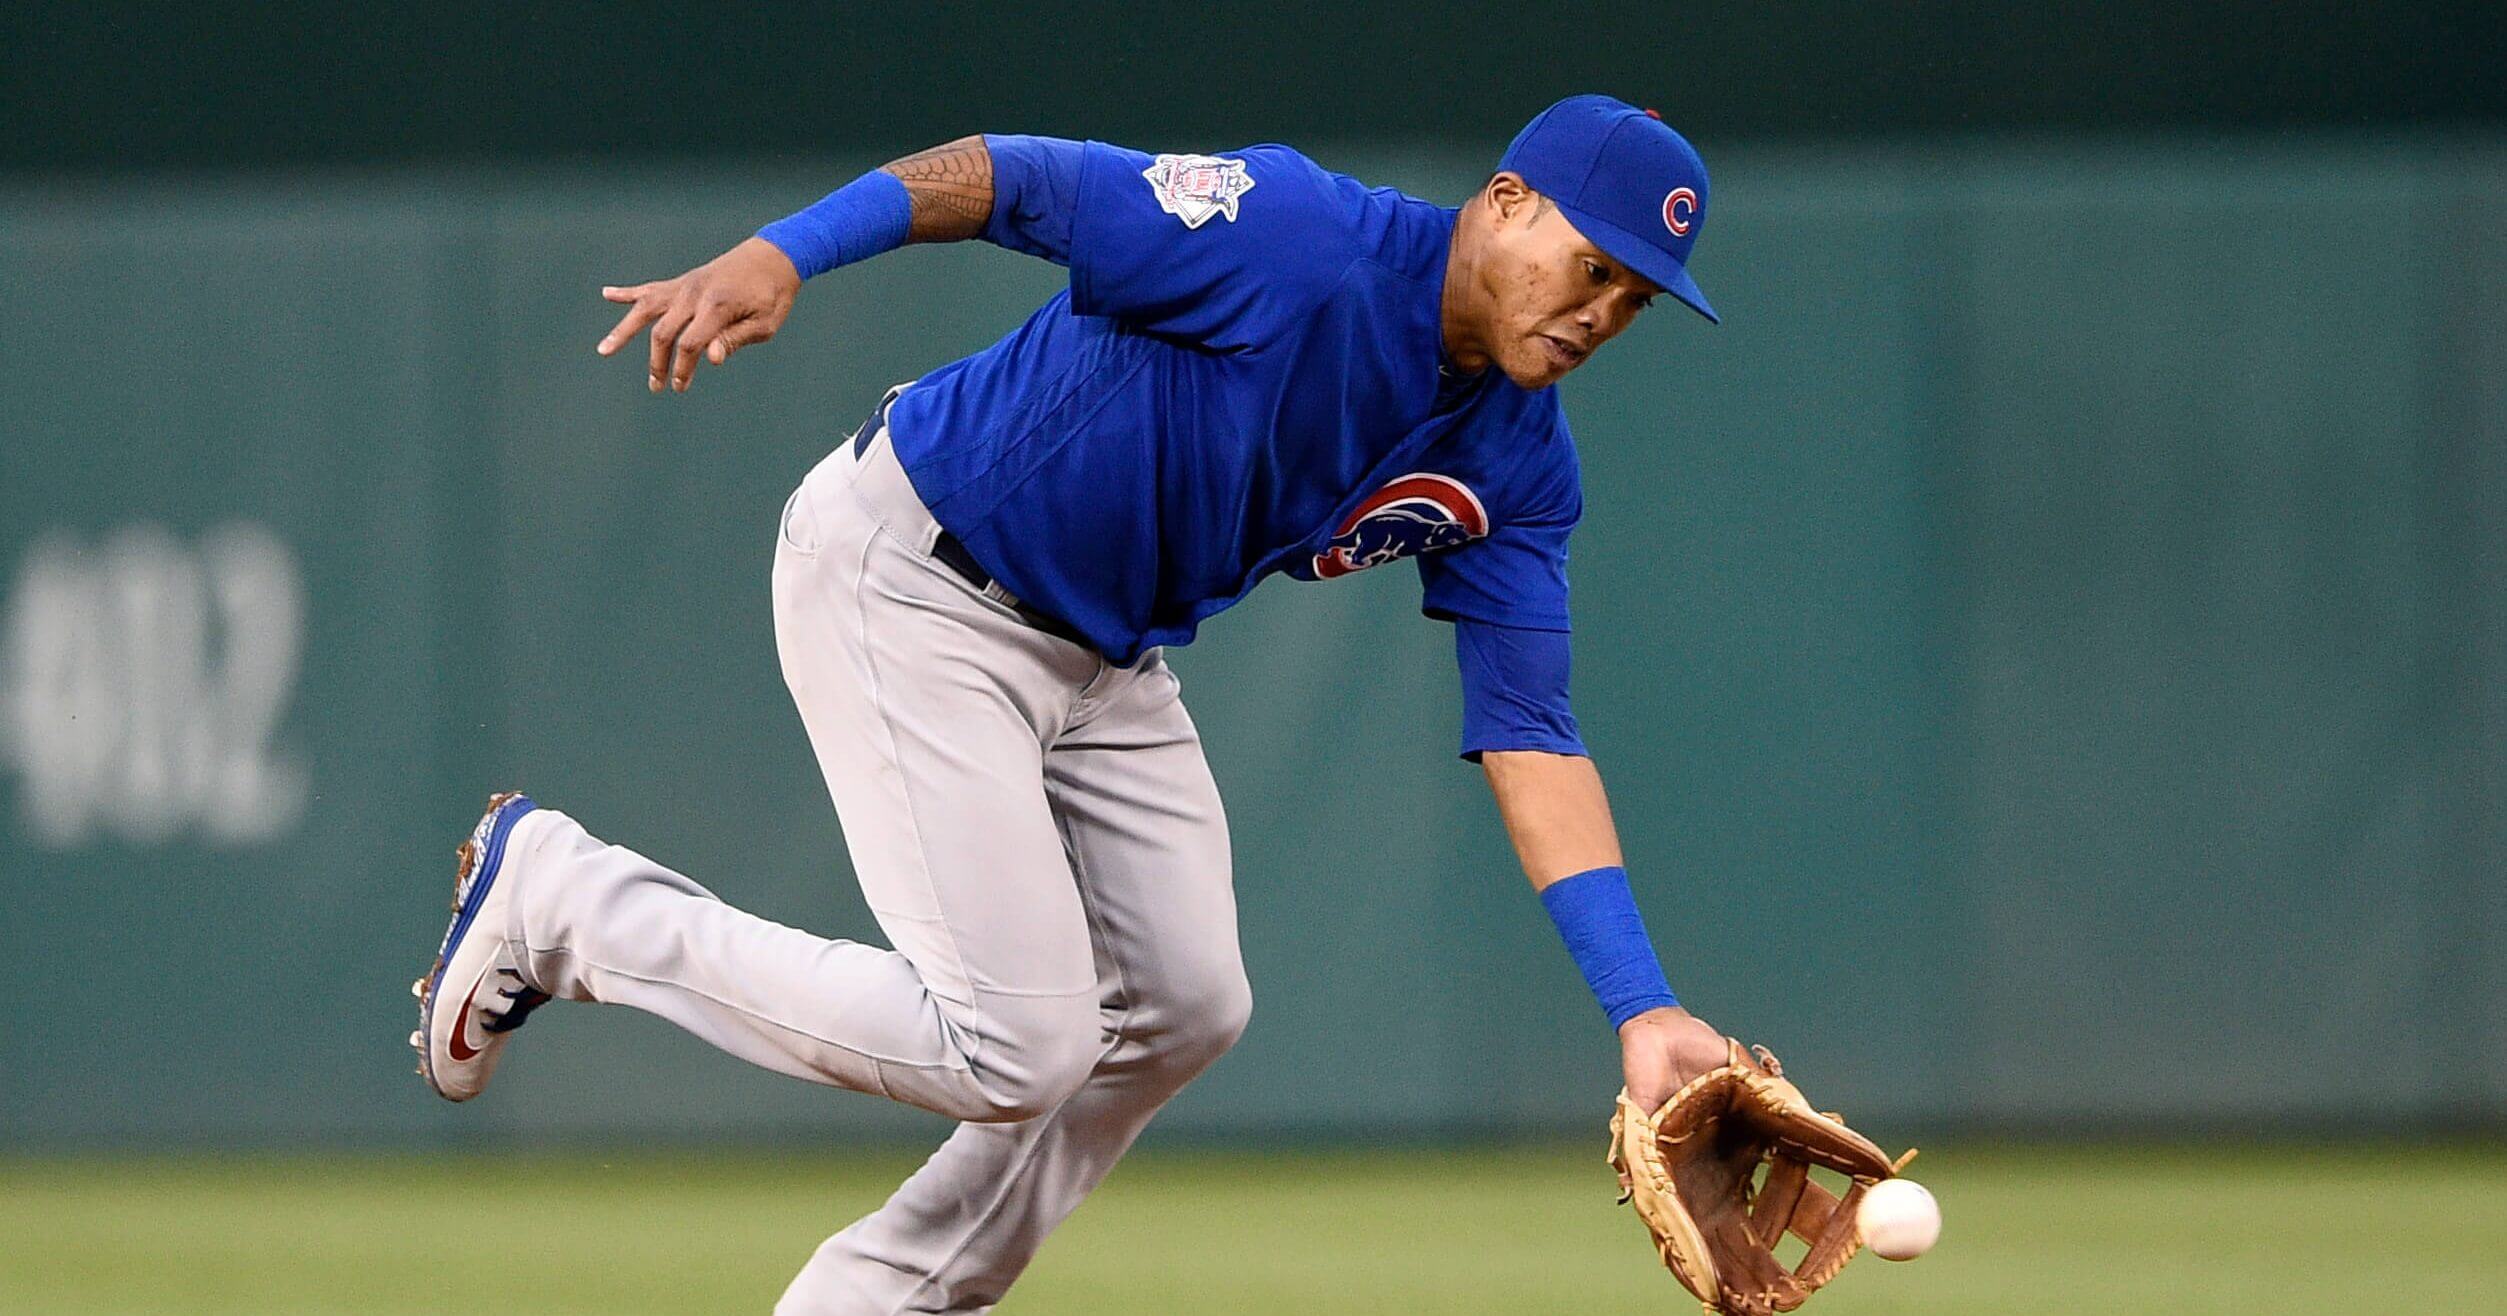 Chicago Cubs shortstop Addison Russell fields a ground ball during a Sept. 8 game against they Washington Nationals.